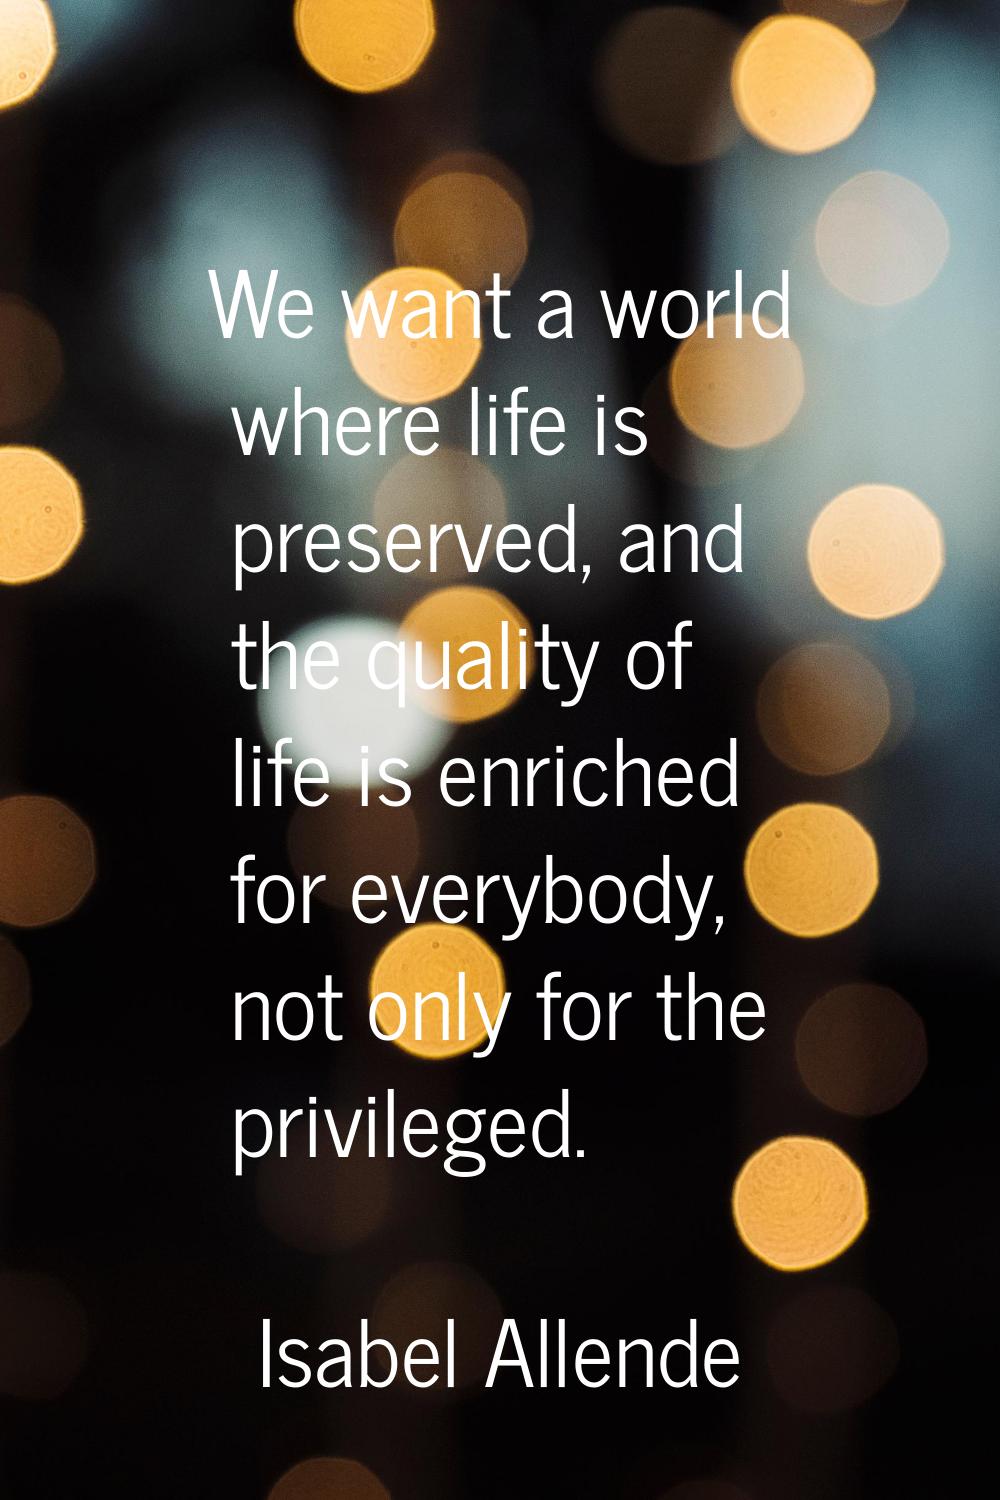 We want a world where life is preserved, and the quality of life is enriched for everybody, not onl